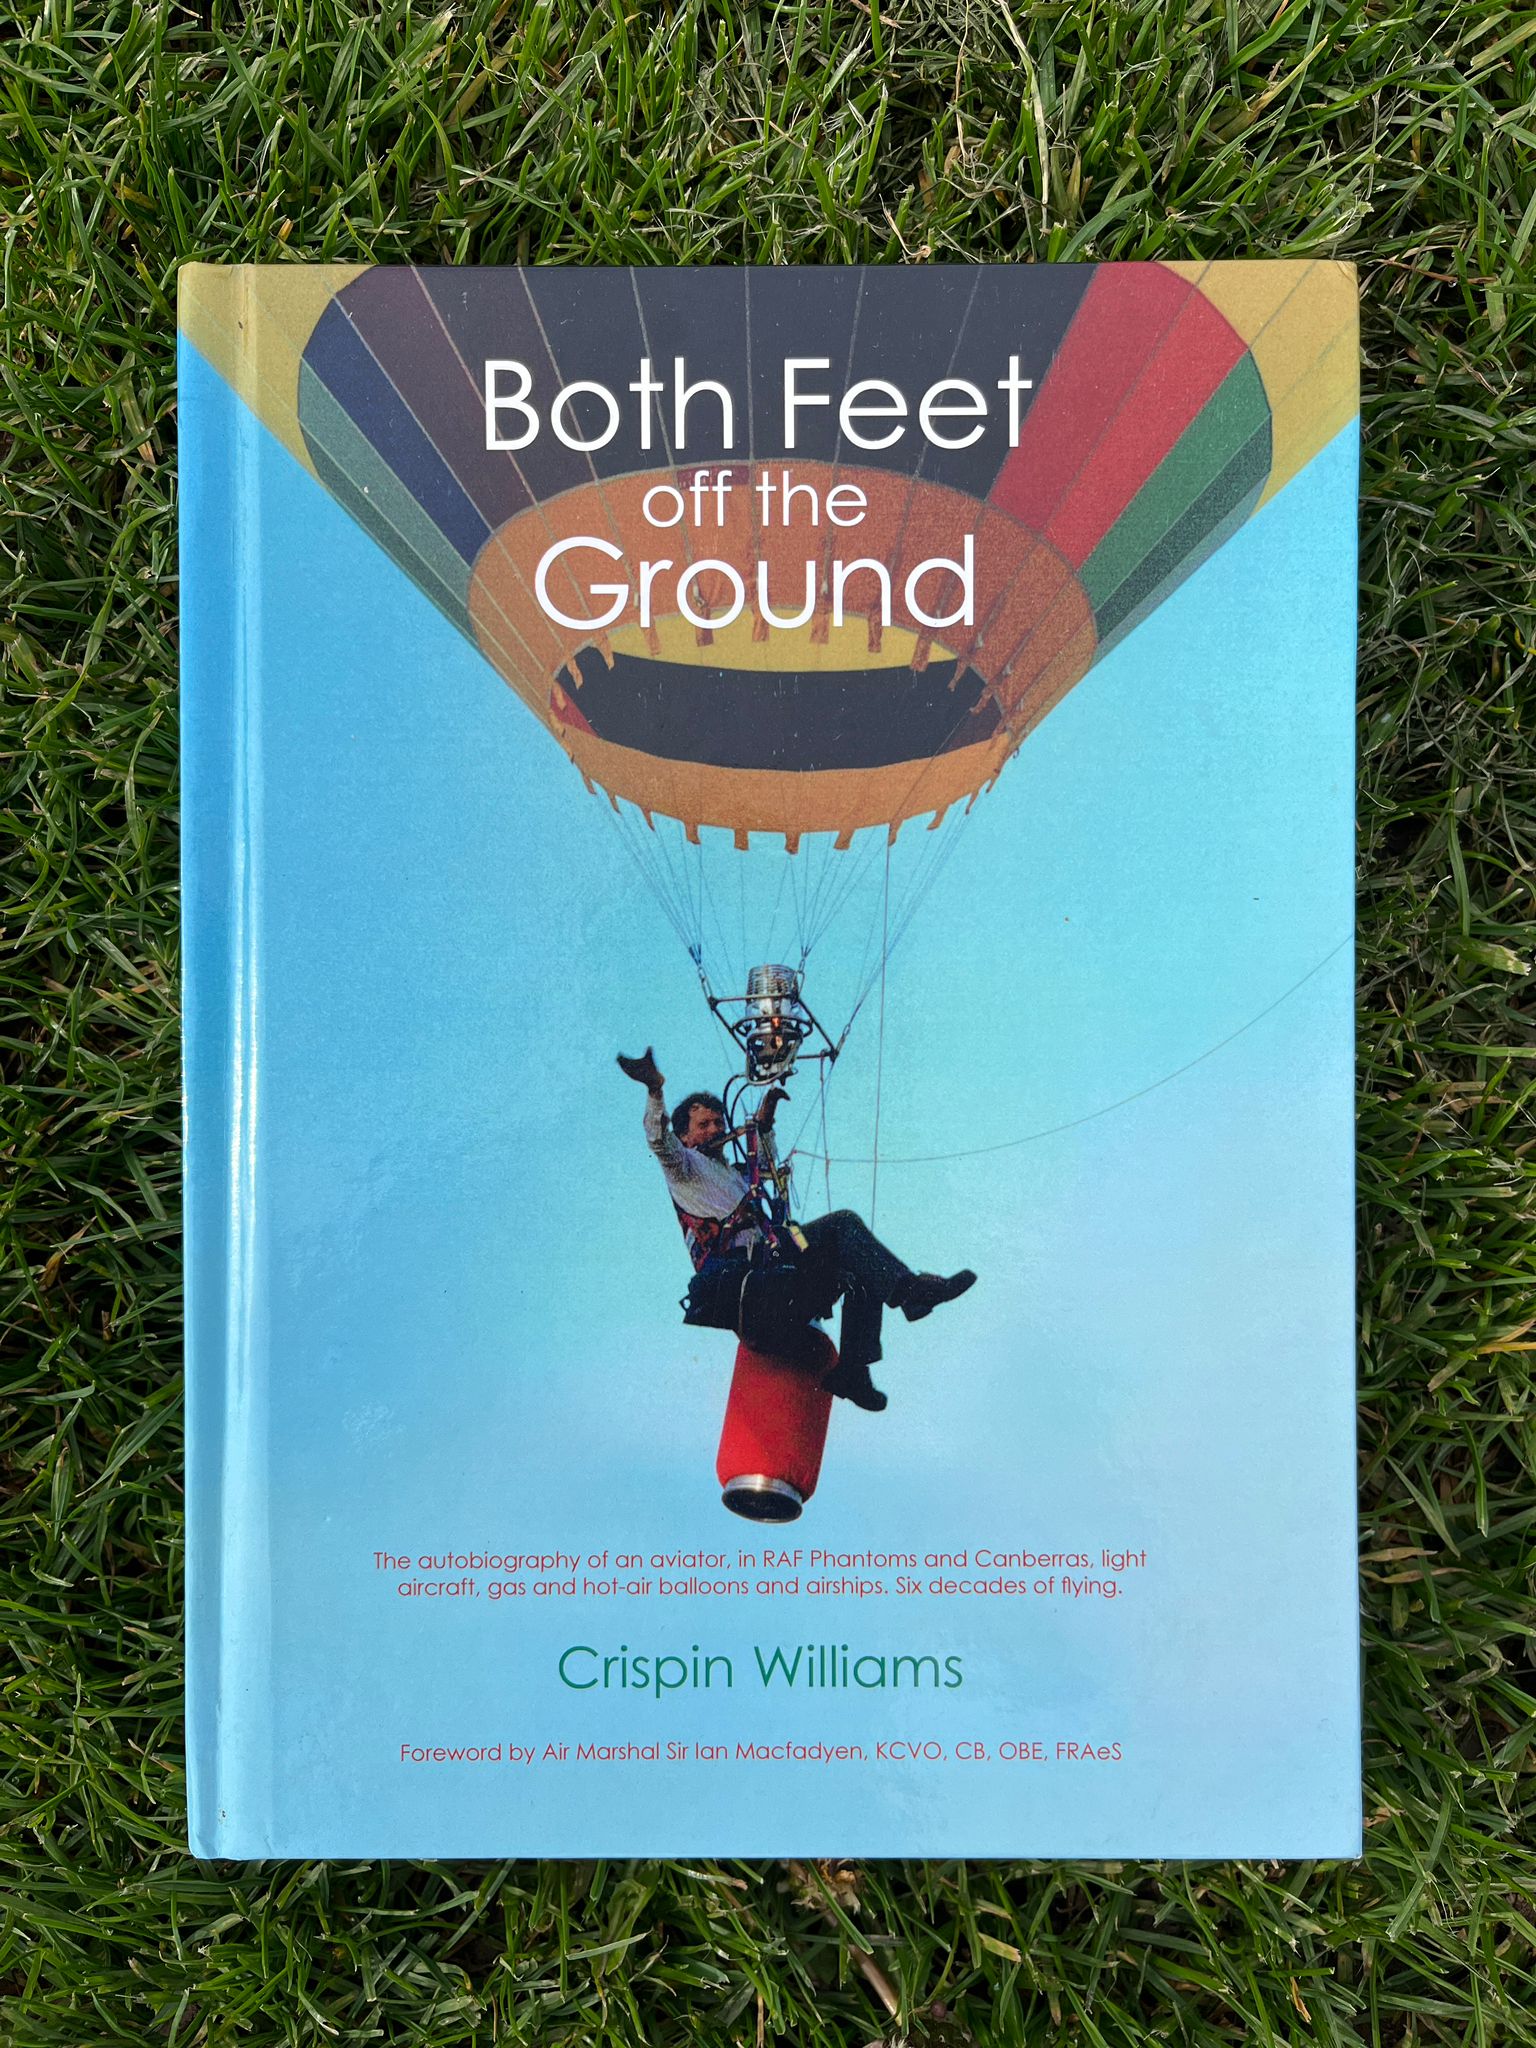 Crispin Williams - Both Feet off the Ground - Fly Away Ballooning